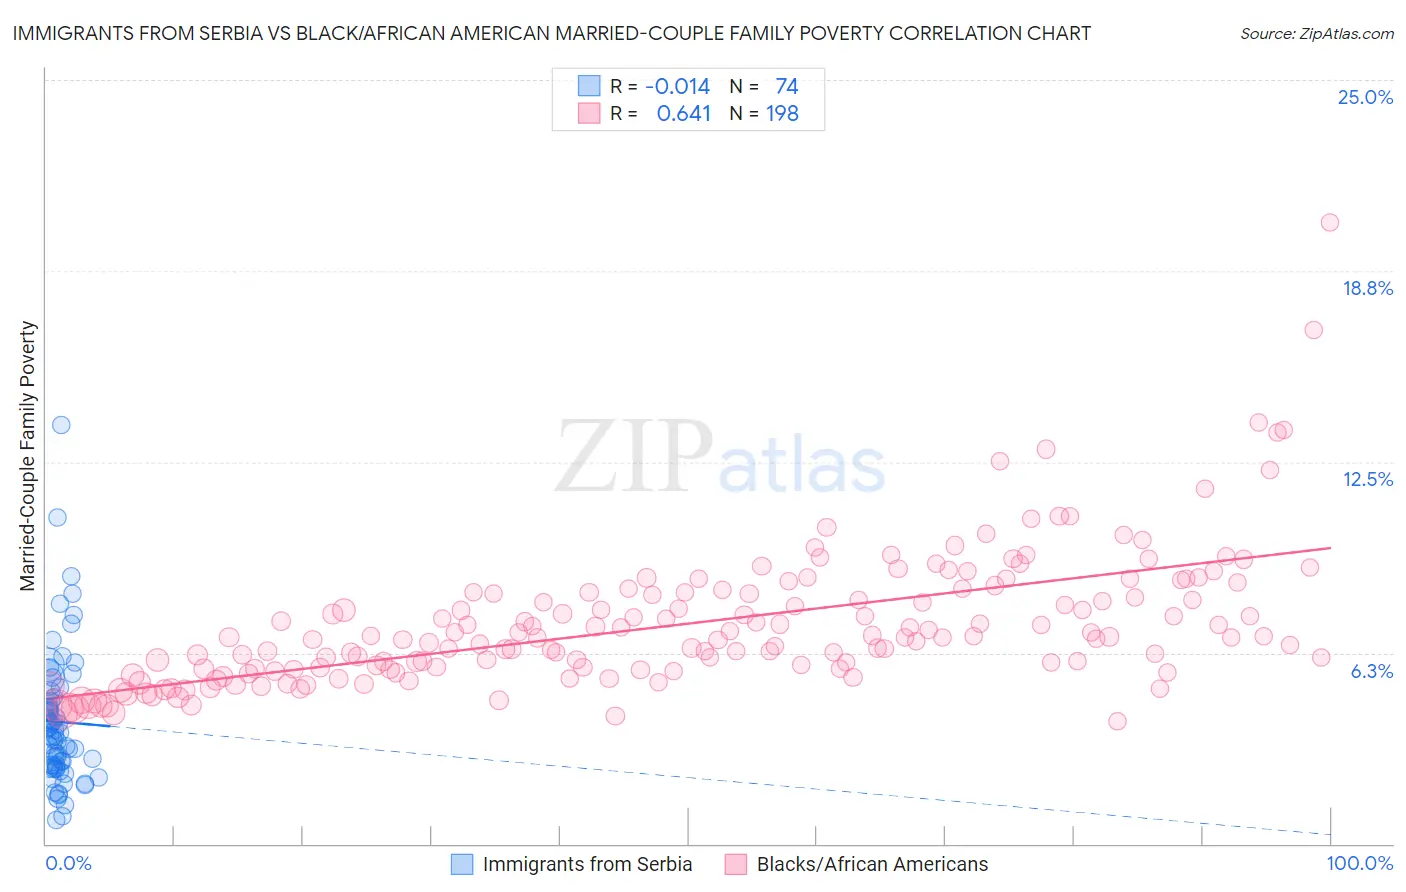 Immigrants from Serbia vs Black/African American Married-Couple Family Poverty